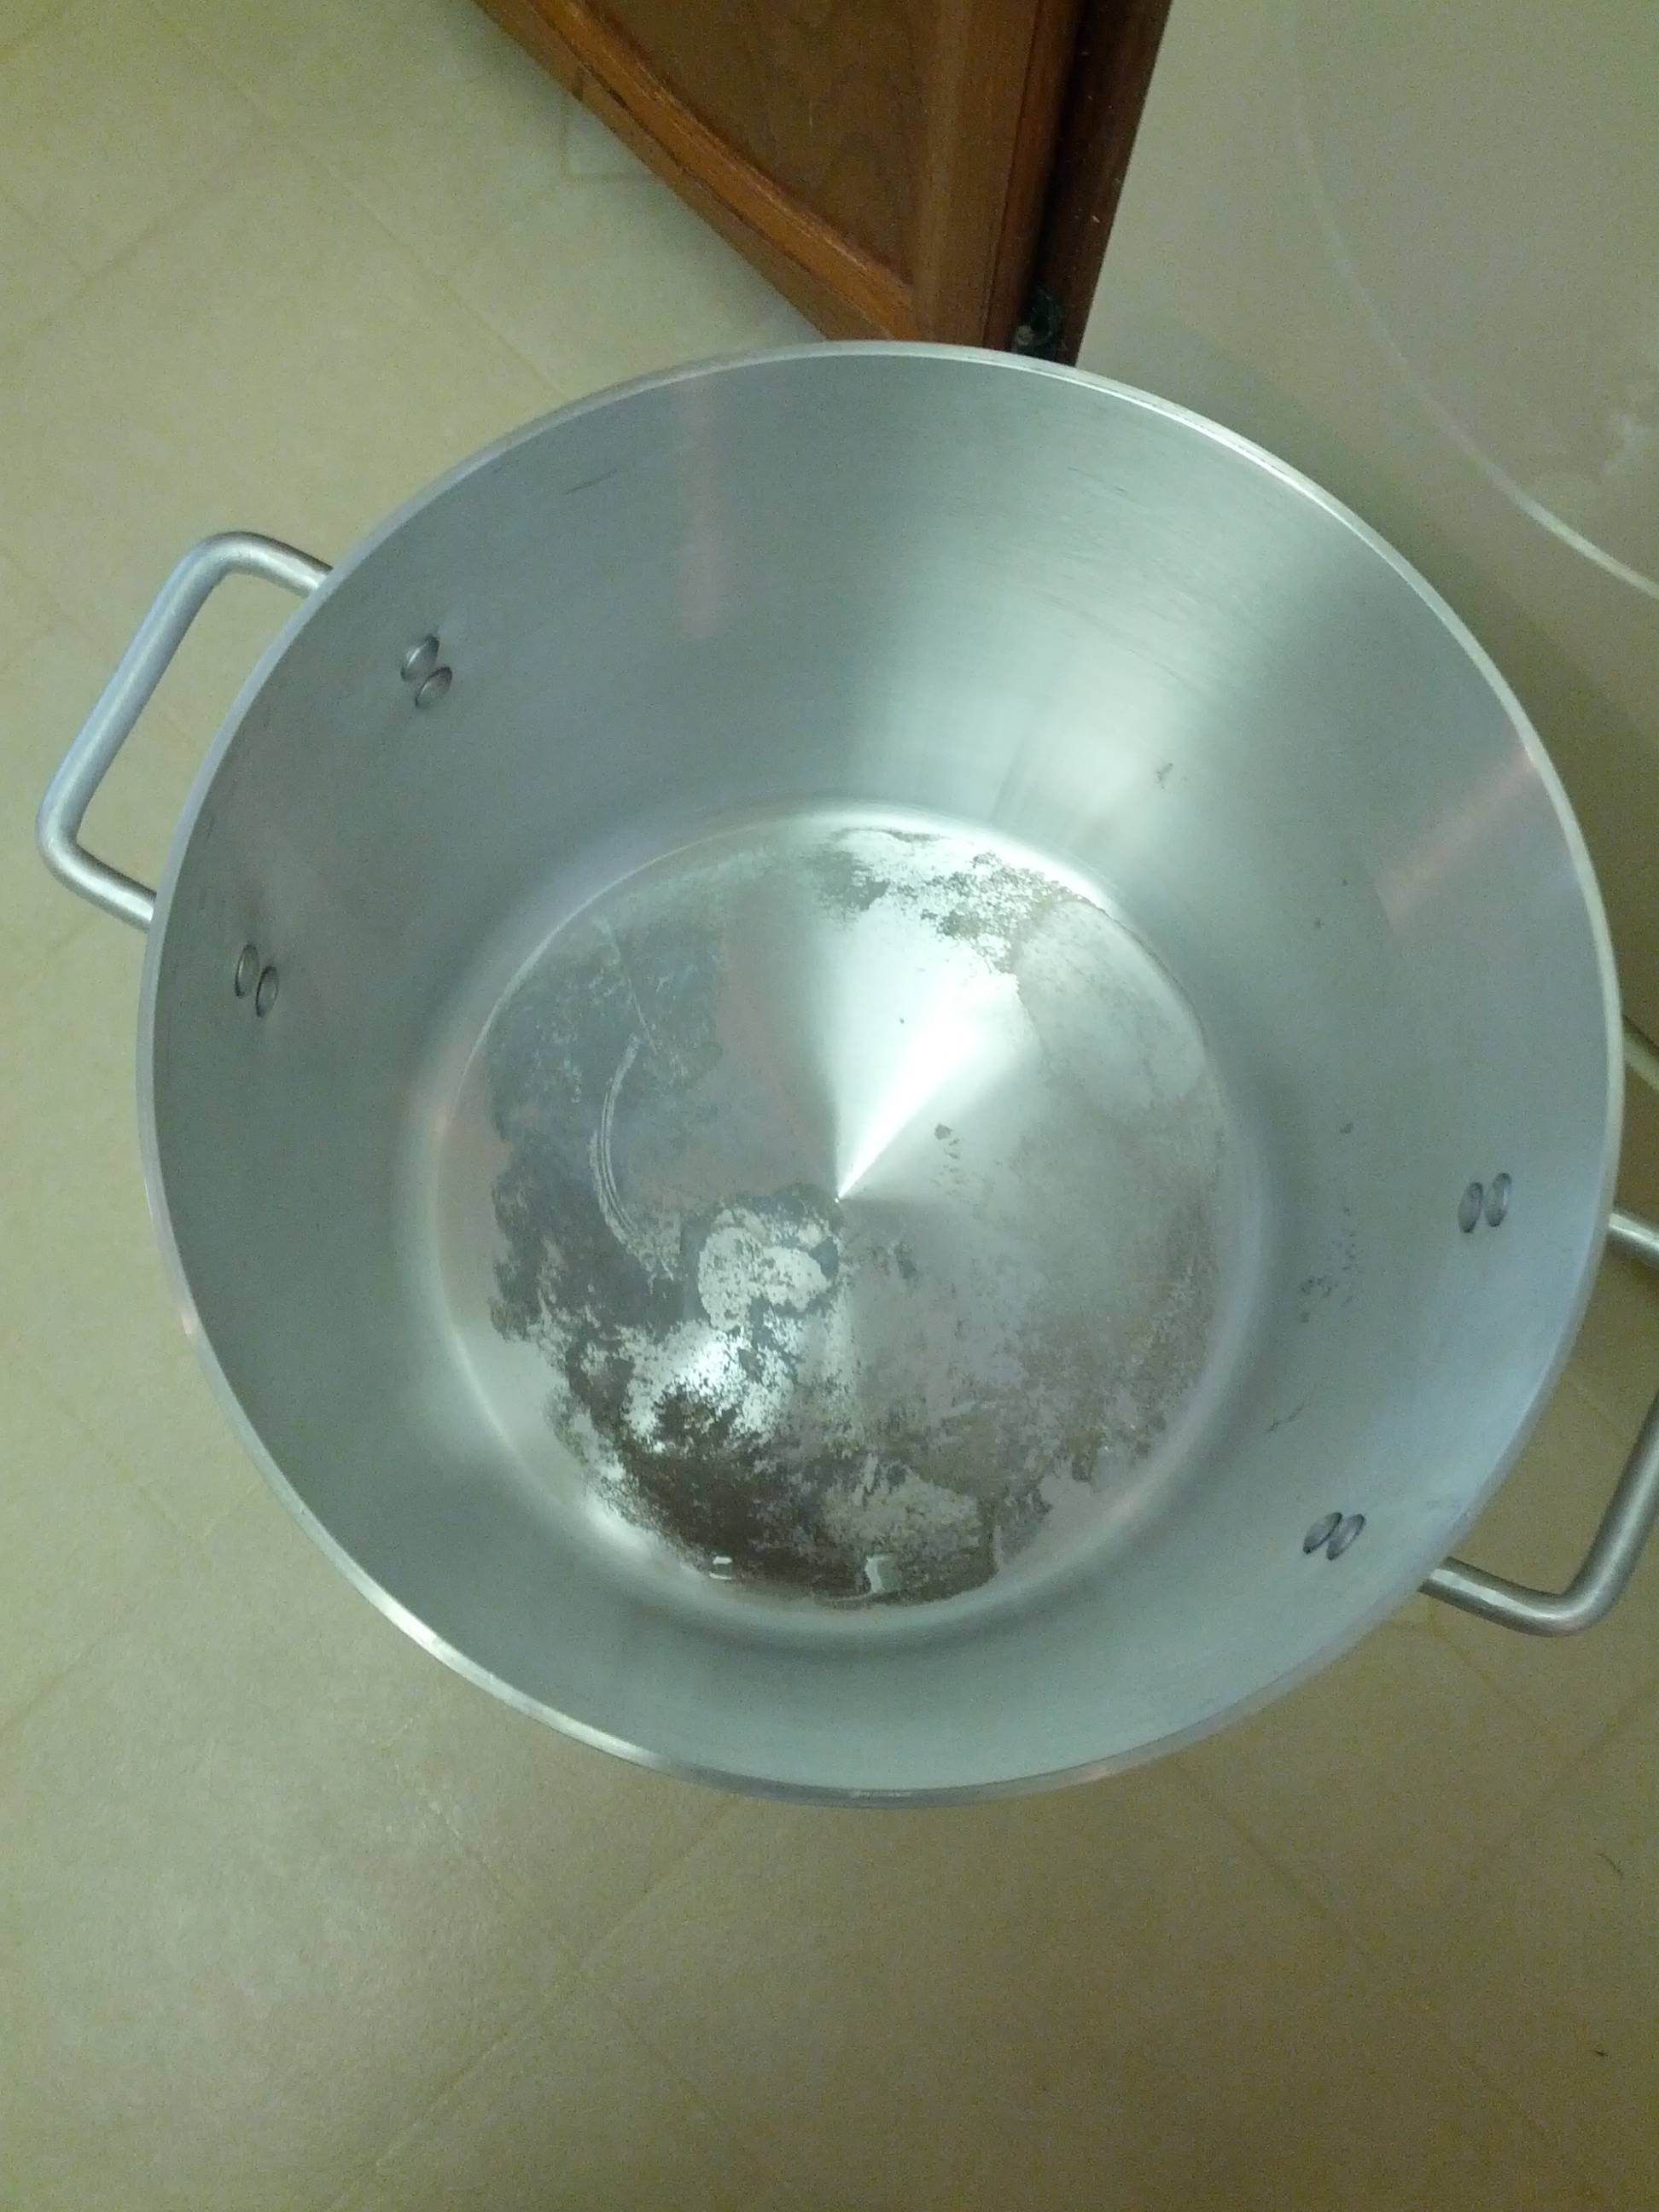 How to Clean an Aluminum Pan